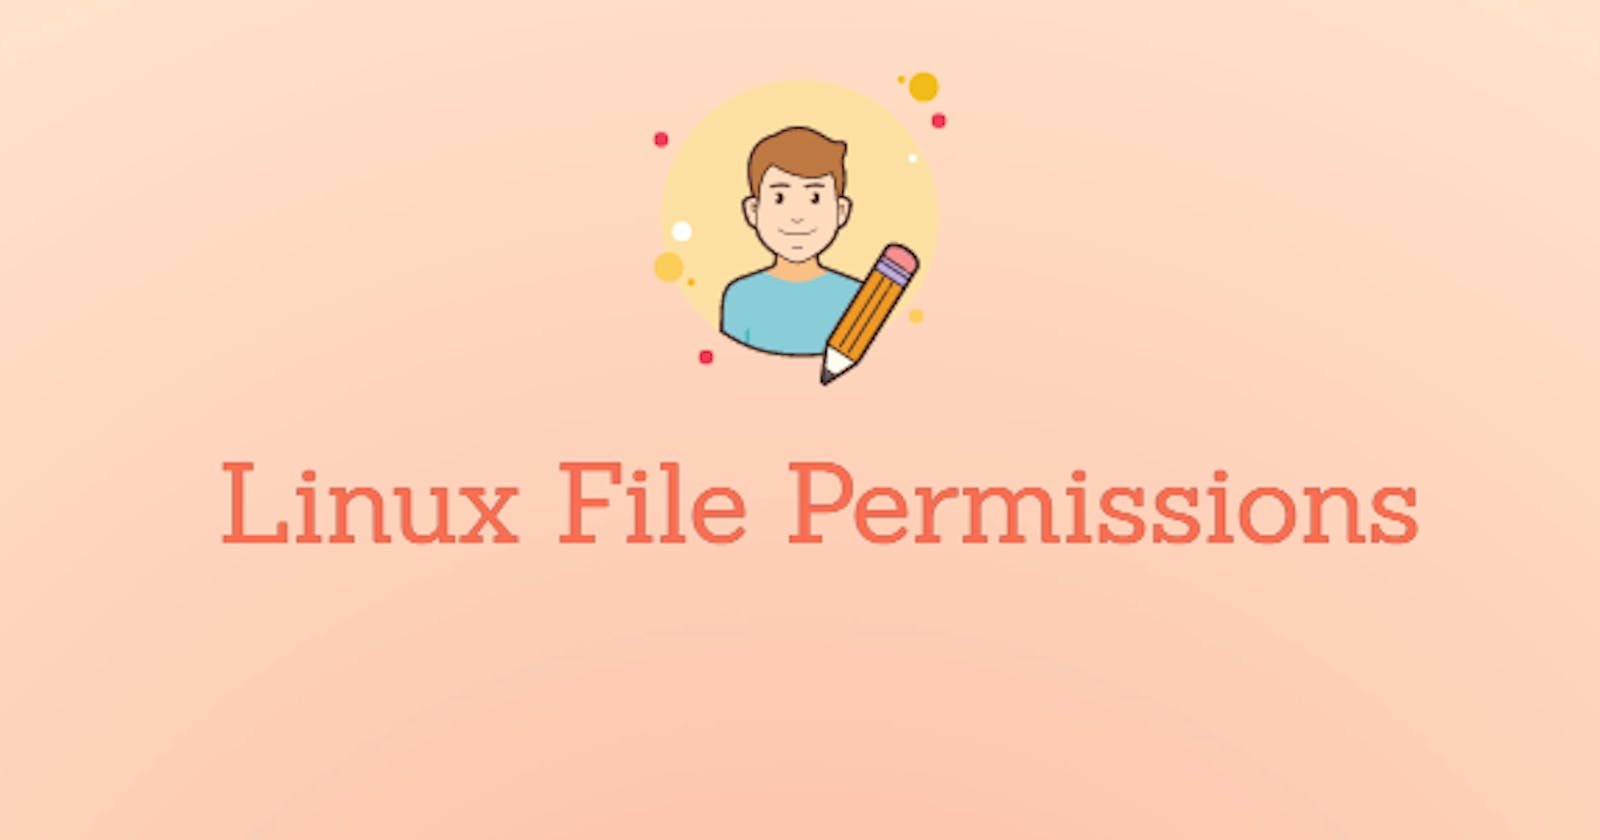 Day 6: Linux File Permissions